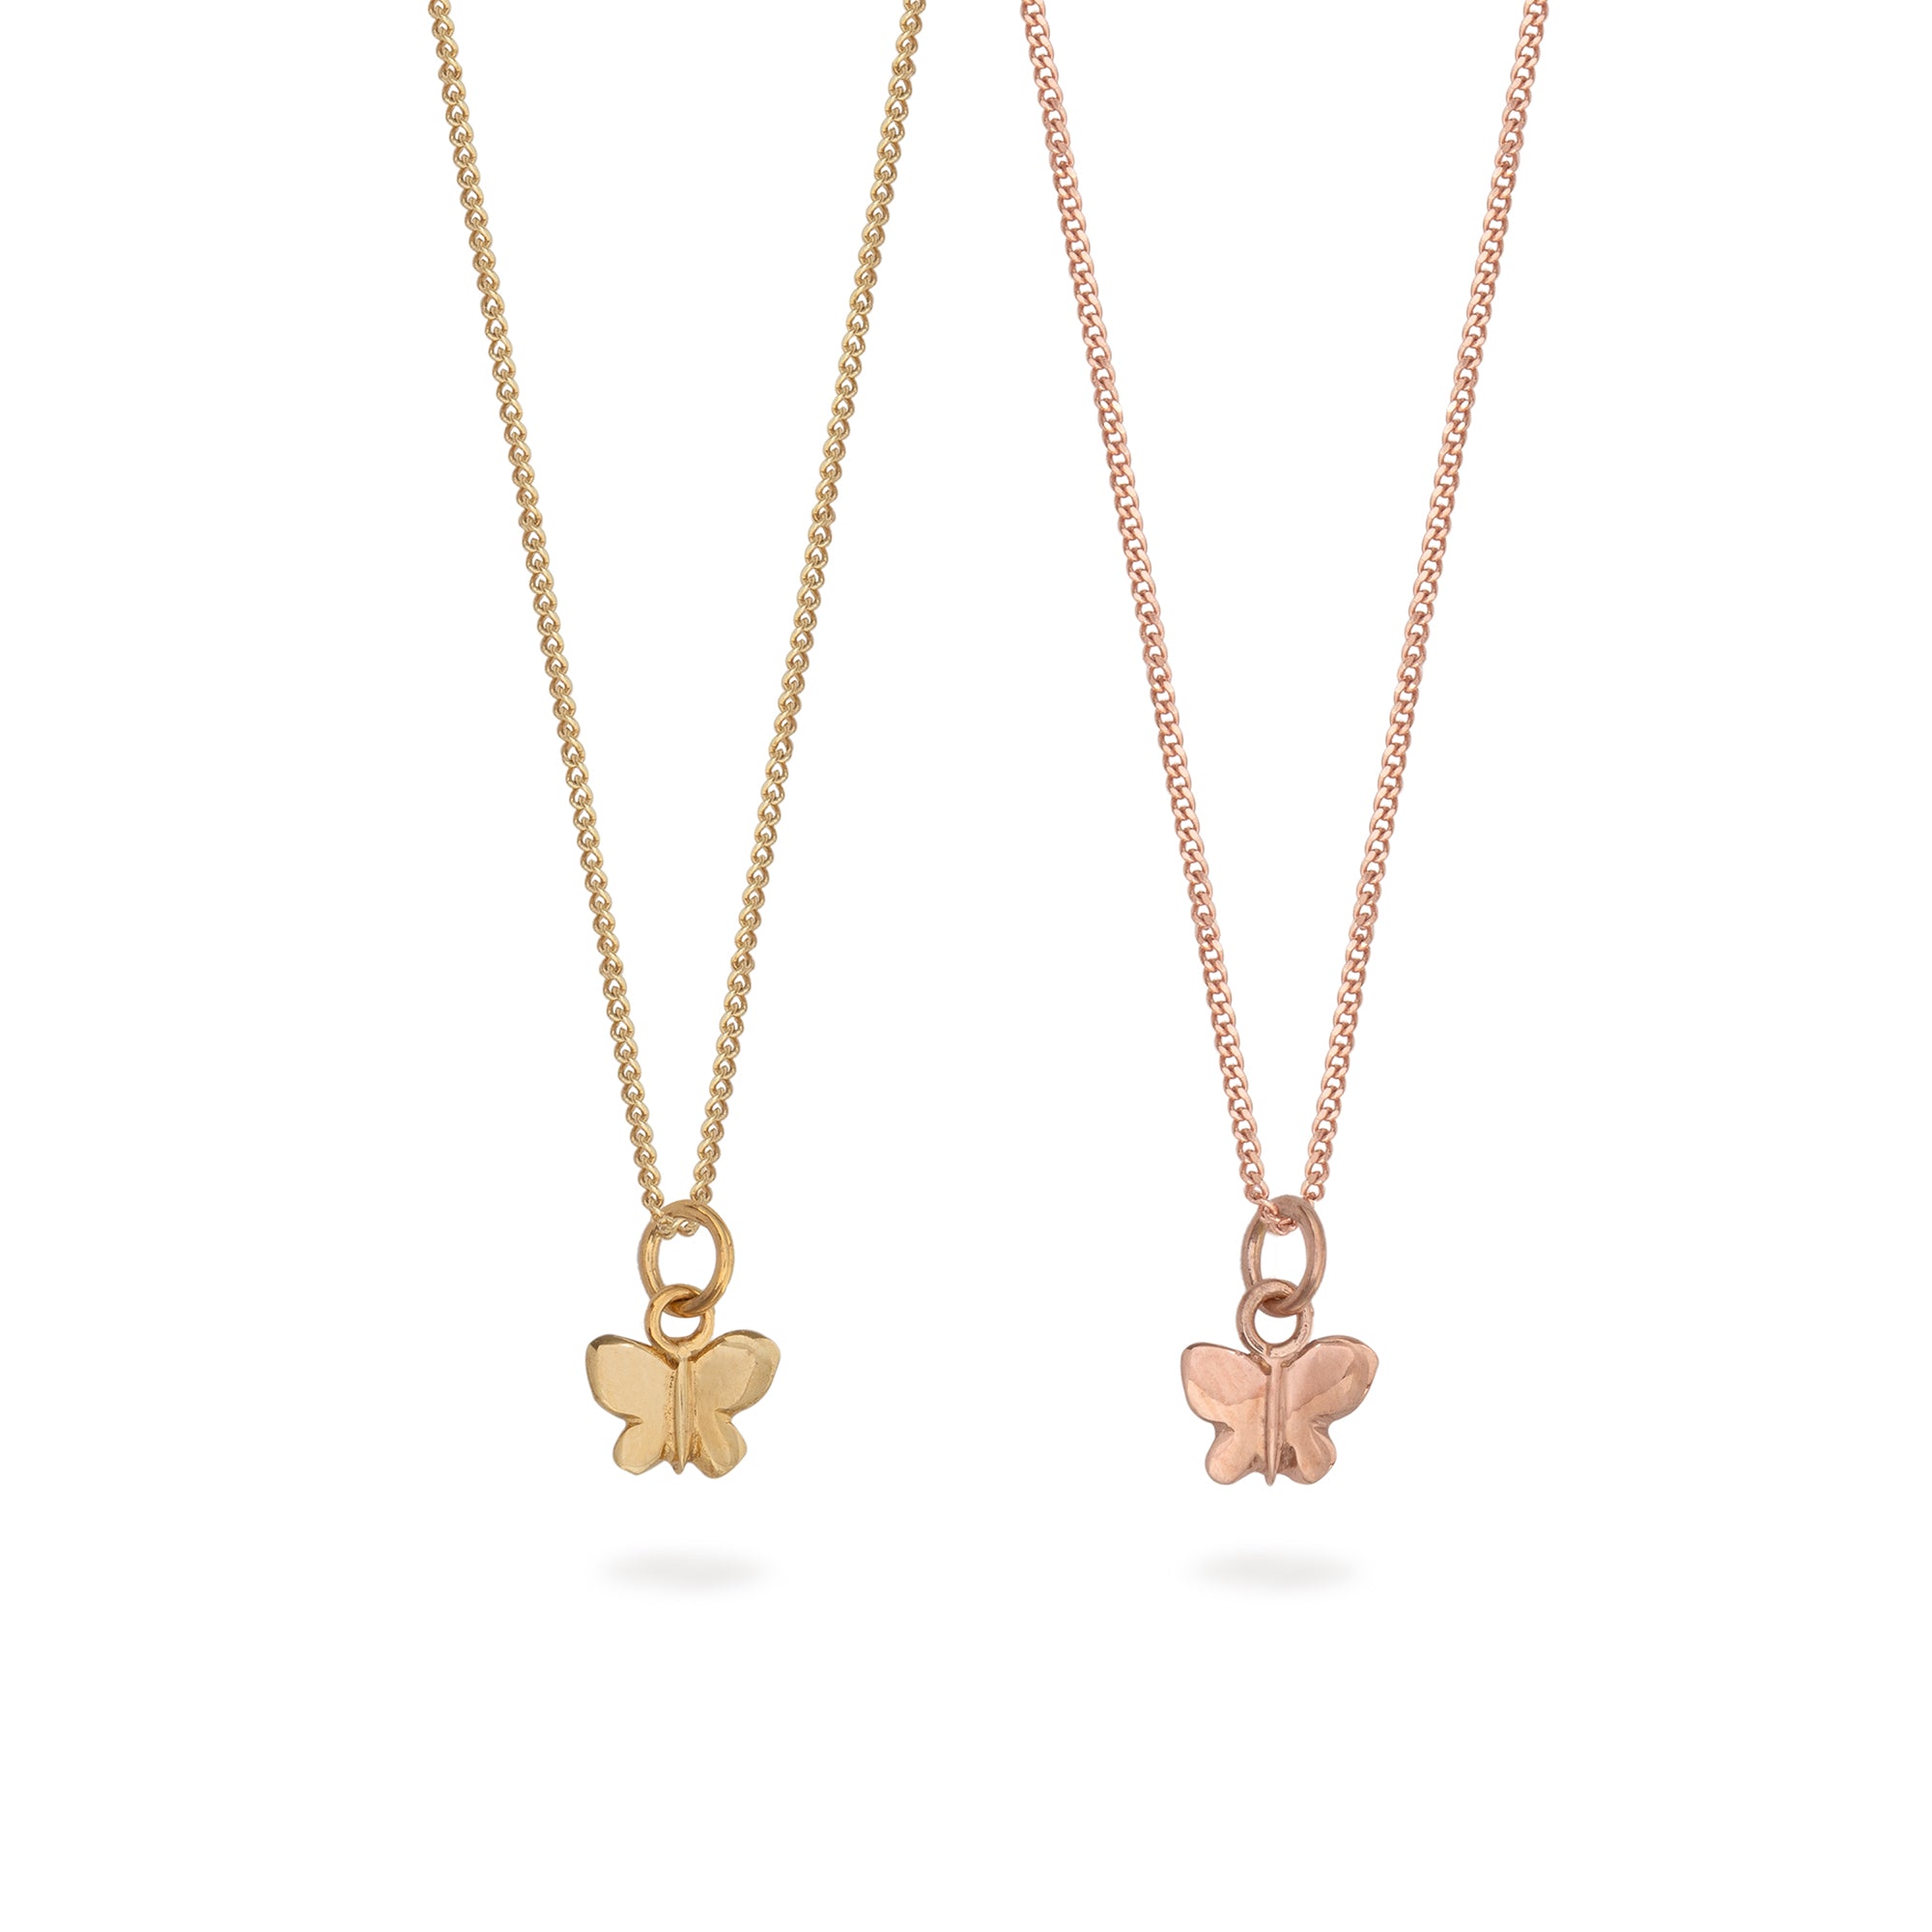 Butterfly Charm Necklace Rose Gold Vermeil